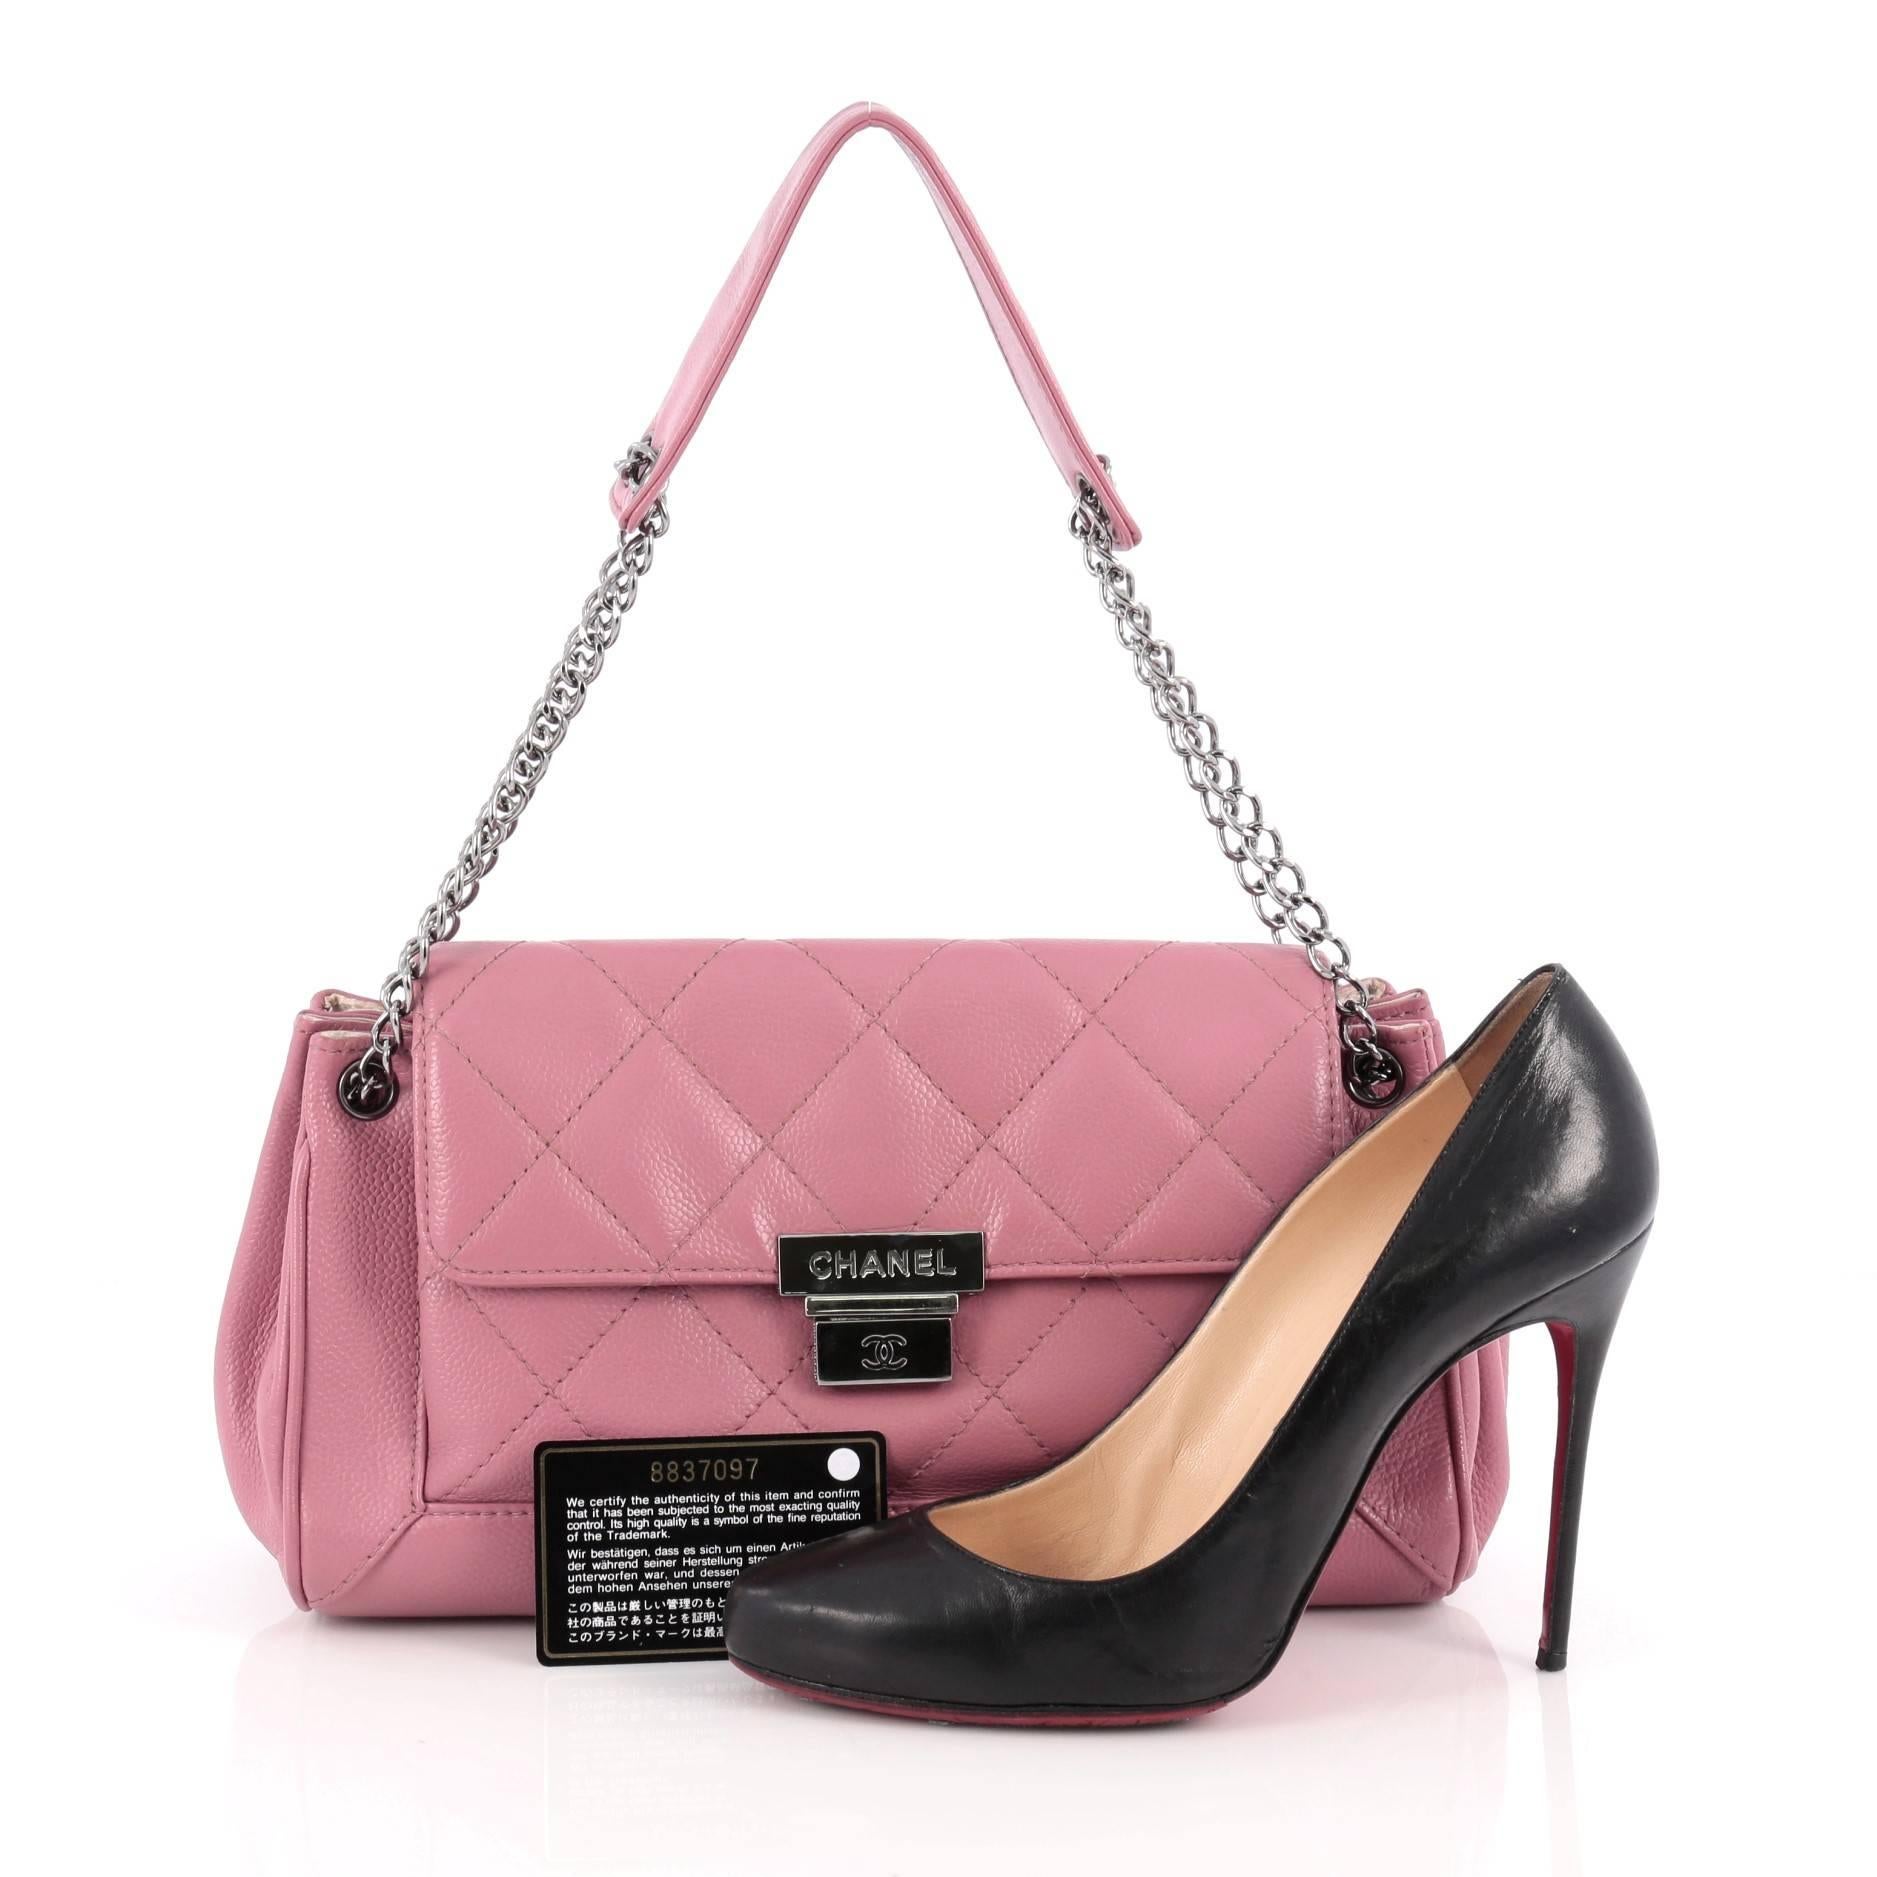 This authentic Chanel Accordion Push Lock Flap Bag Quilted Leather Medium showcases a modern and stylized design with vintage-inspired flair. Crafted from pink quilted leather, this elegant shoulder bag features accordion expanded sides, dual